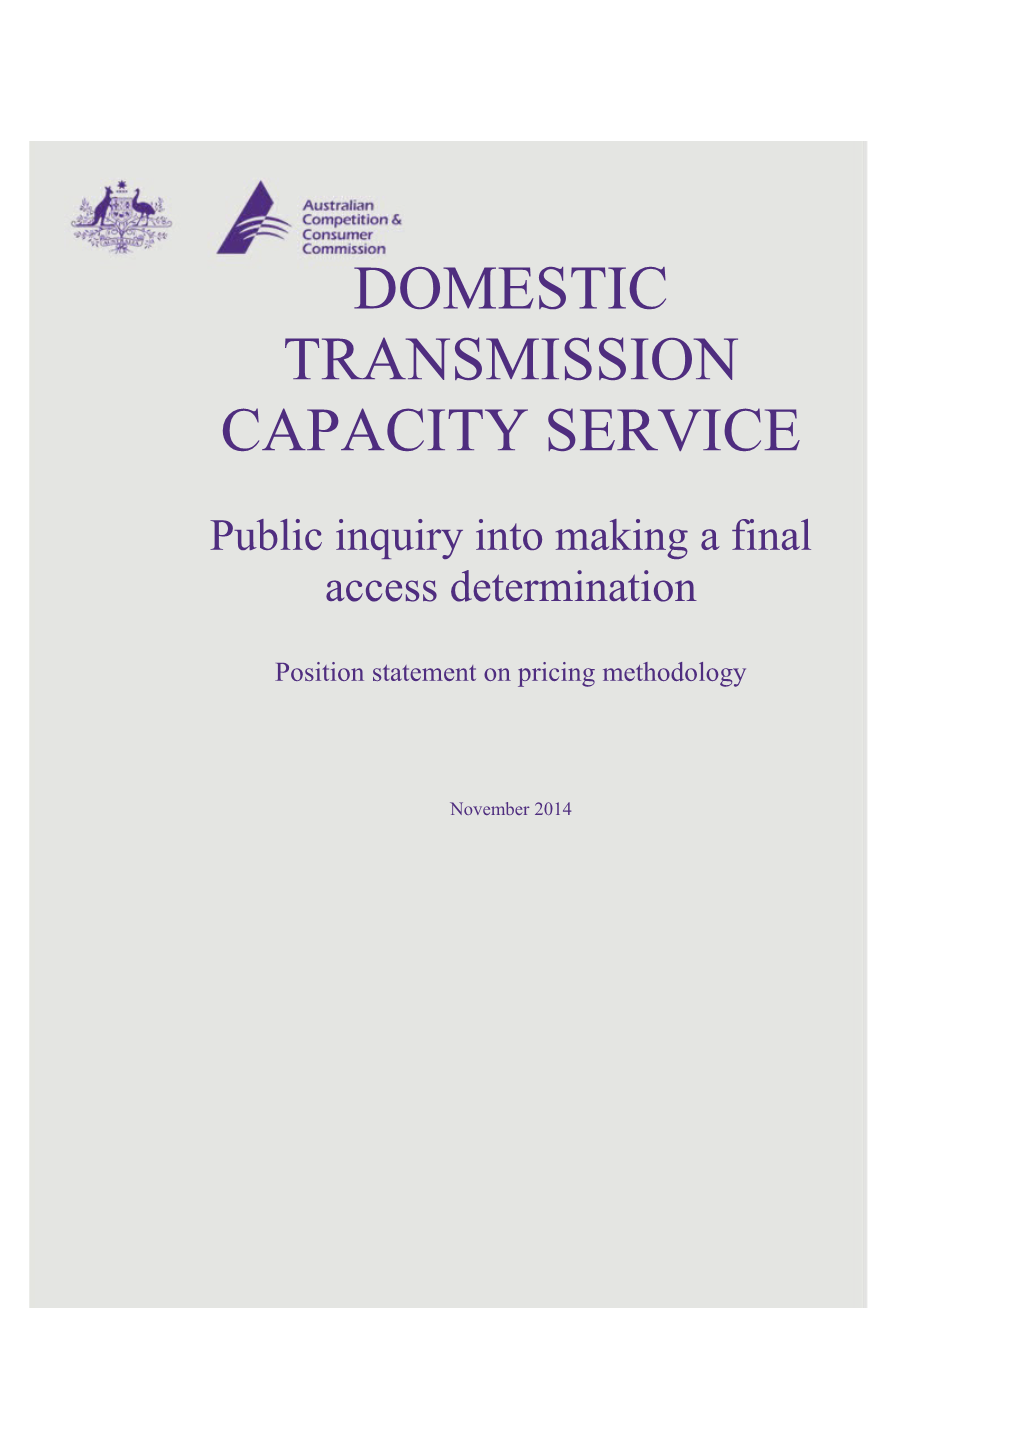 Public Inquiry Into Making a Final Access Determination